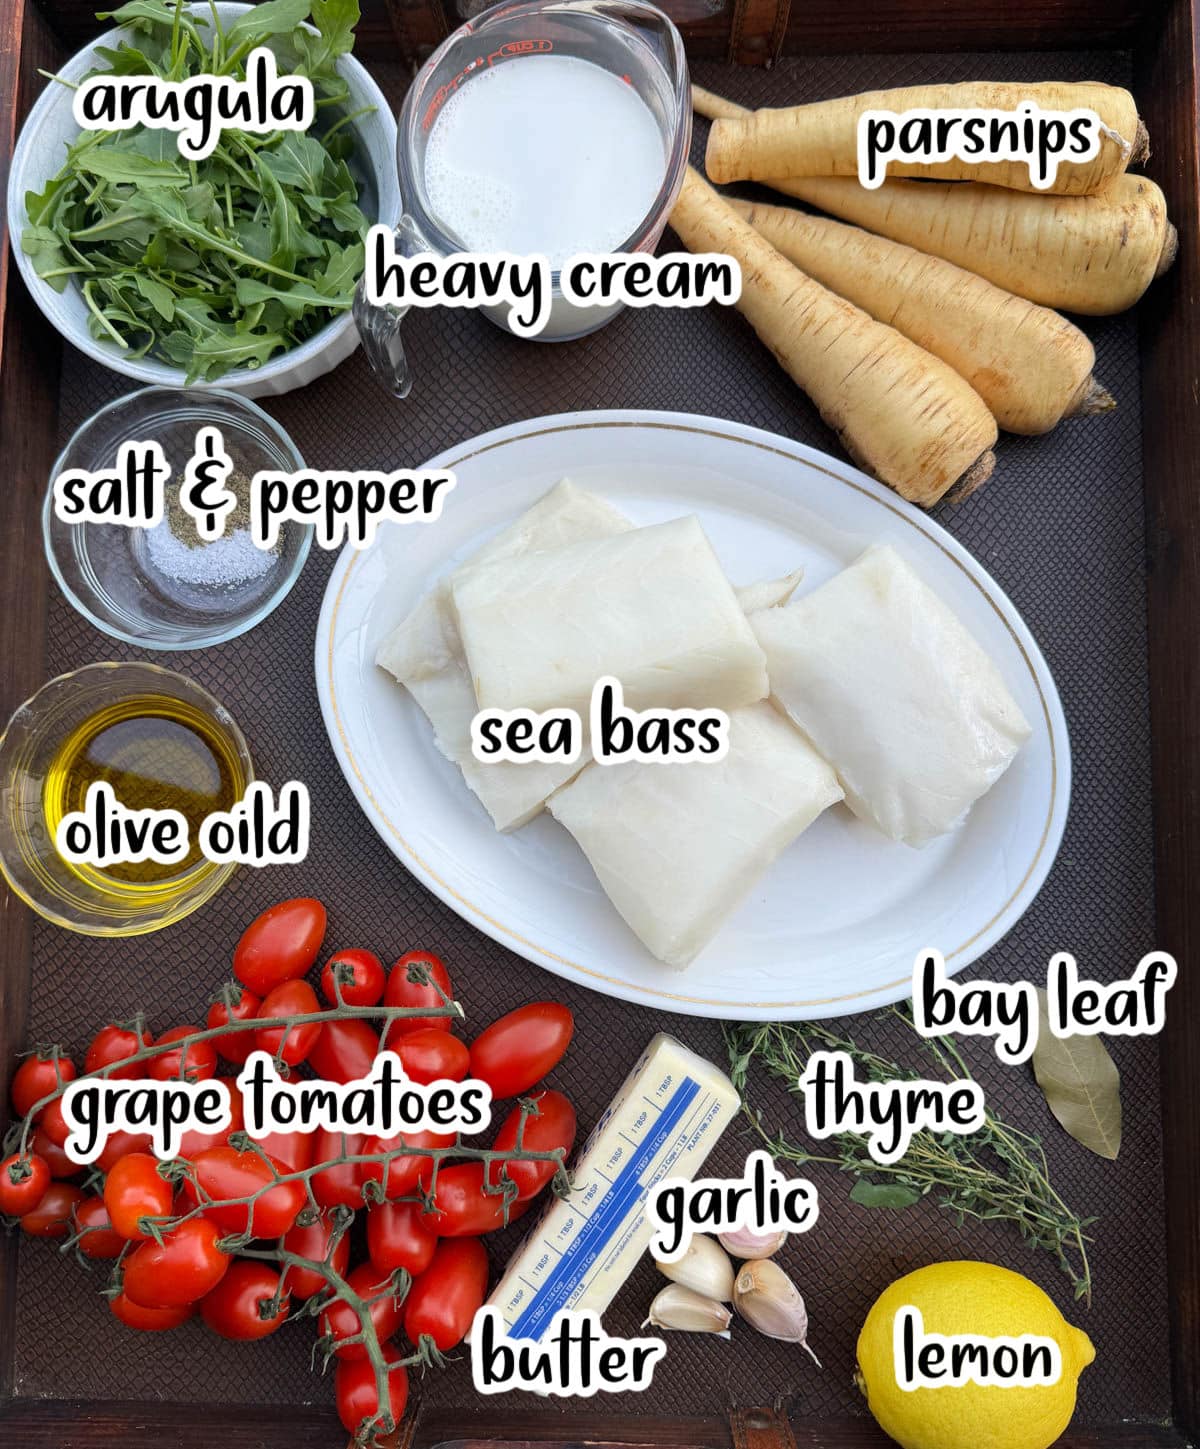 Labeled ingredients of arugula, cream, parsnips, salt and pepper, sea bass, olive oil, tomatoes, butter, garlic, lemon, and herbs.